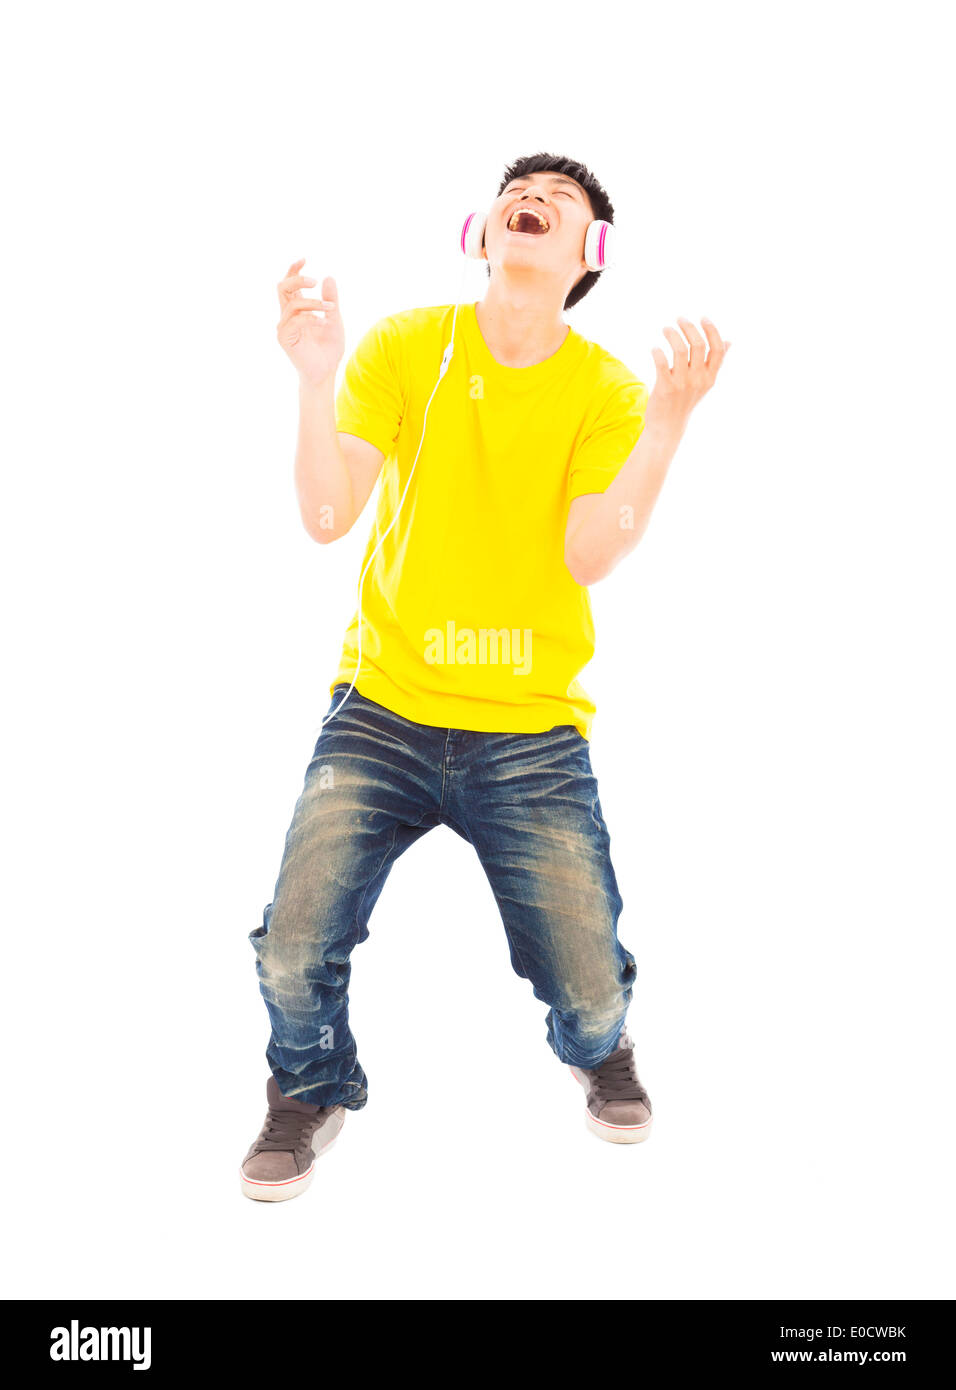 young man listening music and yelling out Stock Photo